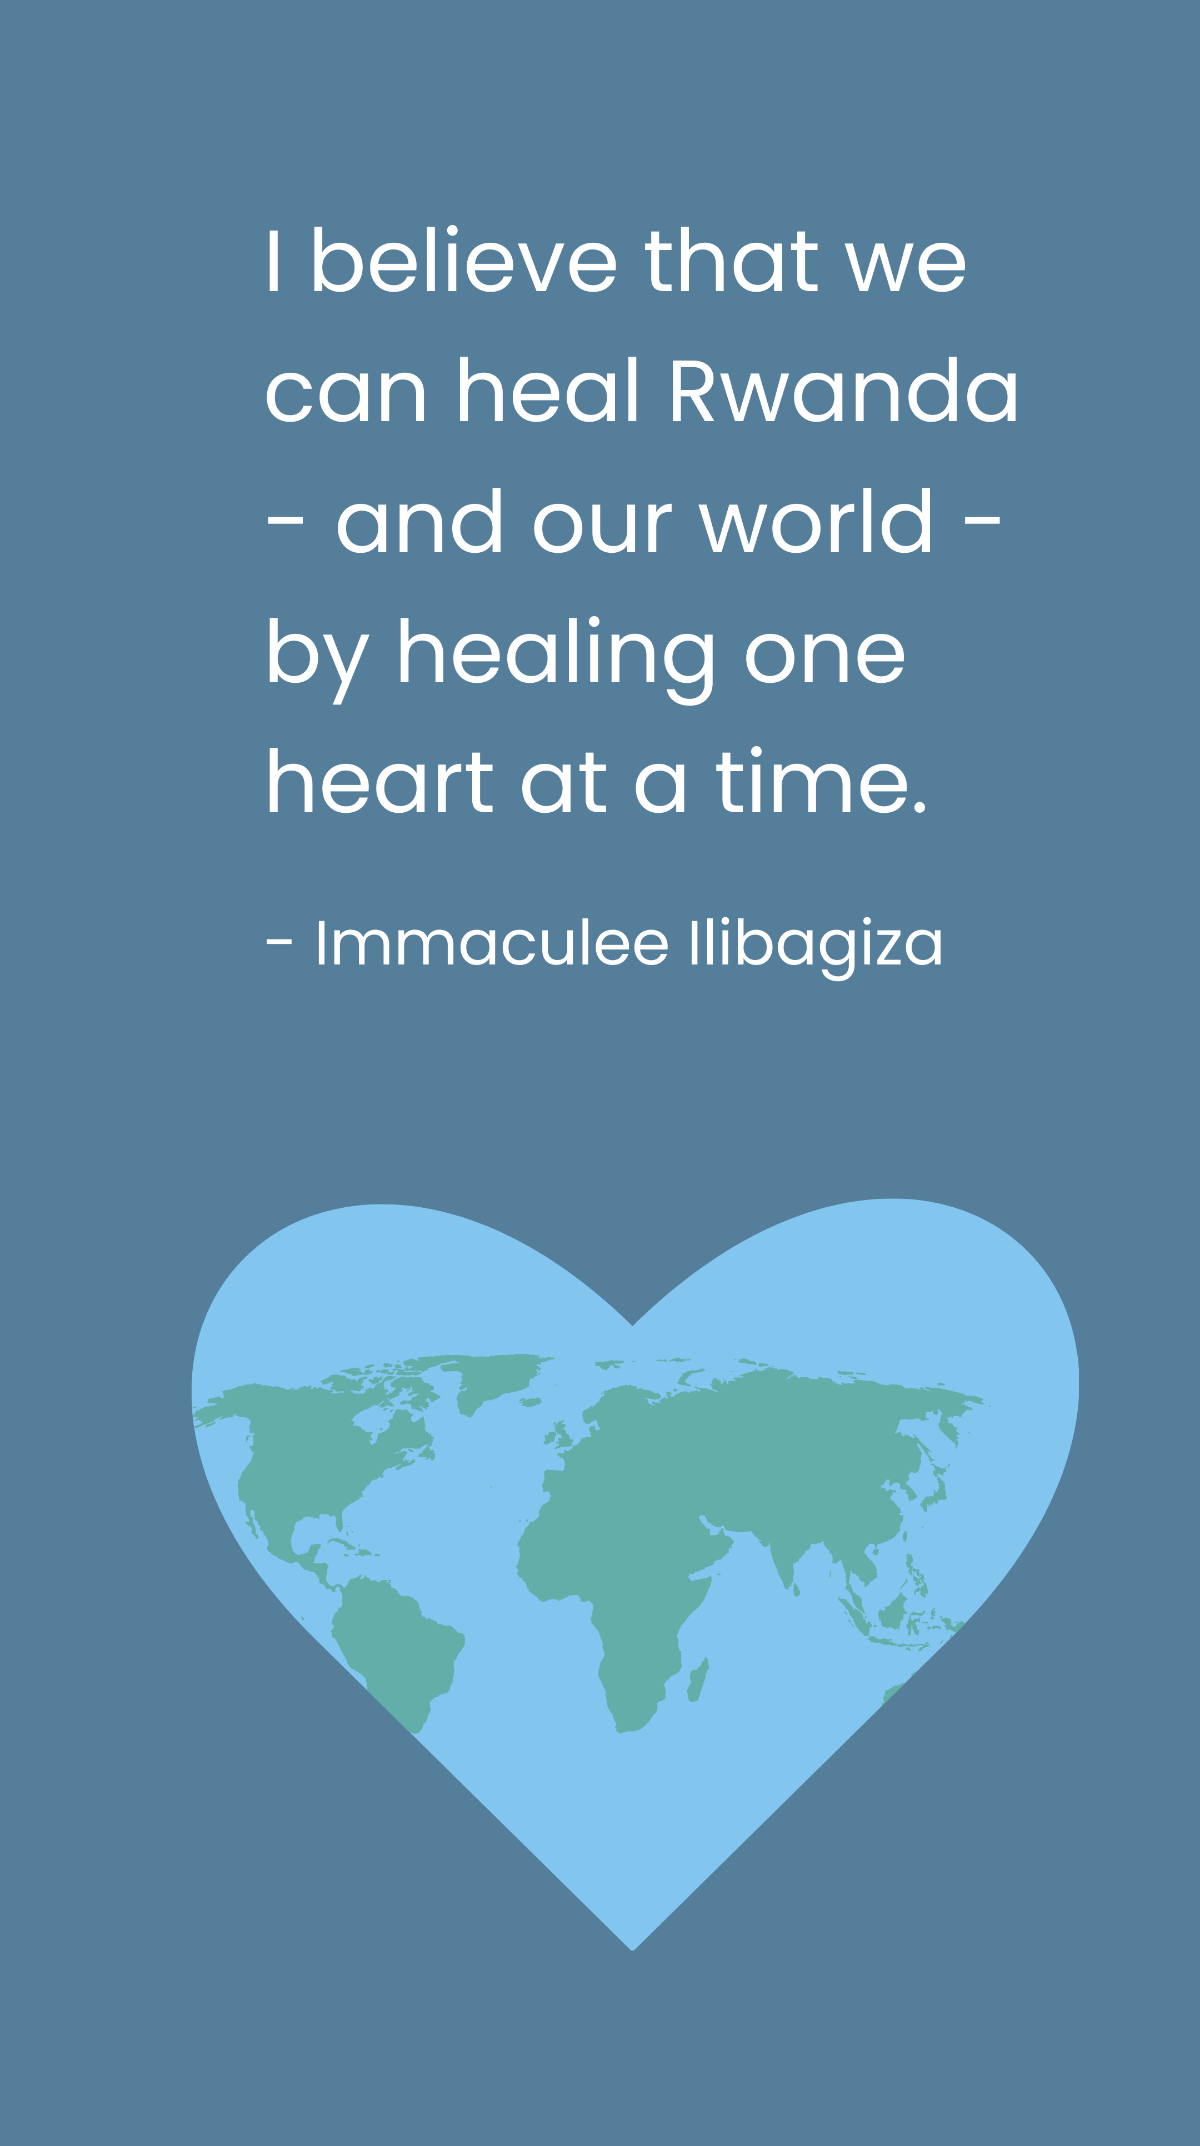 Immaculee Ilibagiza - I believe that we can heal Rwanda - and our world - by healing one heart at a time.